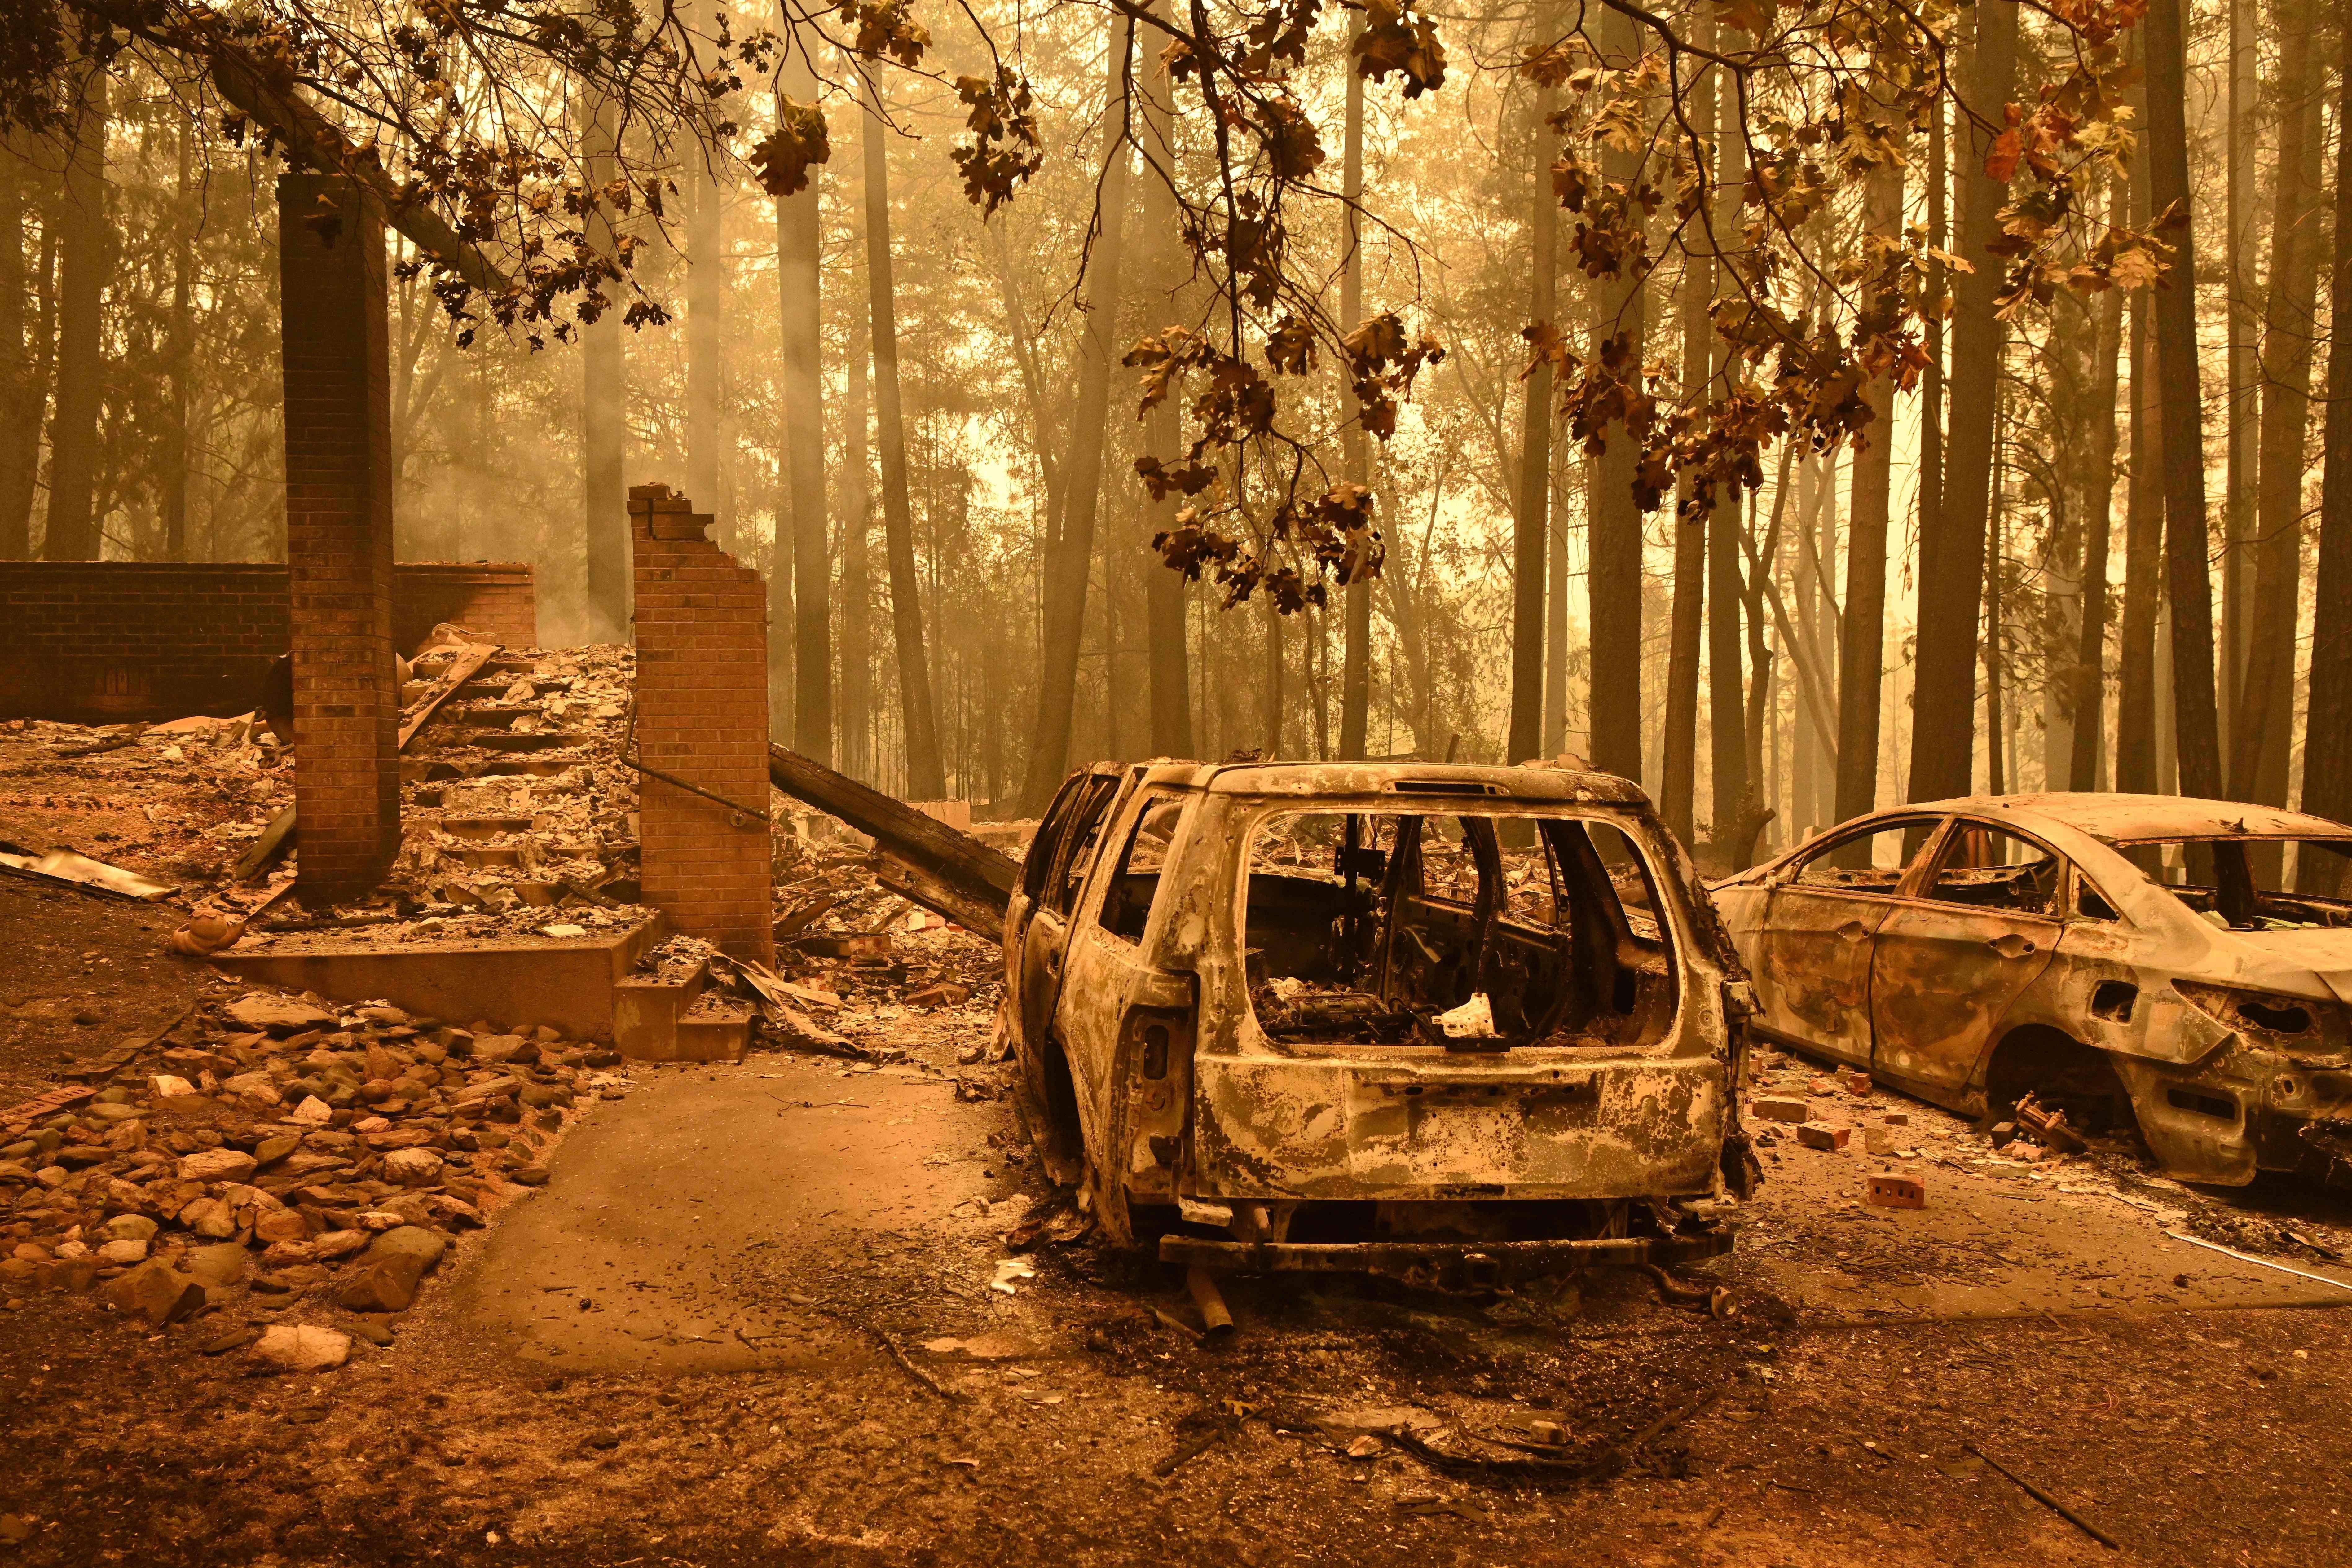 Burned vehicles smolder at a property during the Dixie Fire in the Indian Falls area of unincorporated Plumas County on July 25, 2021. 